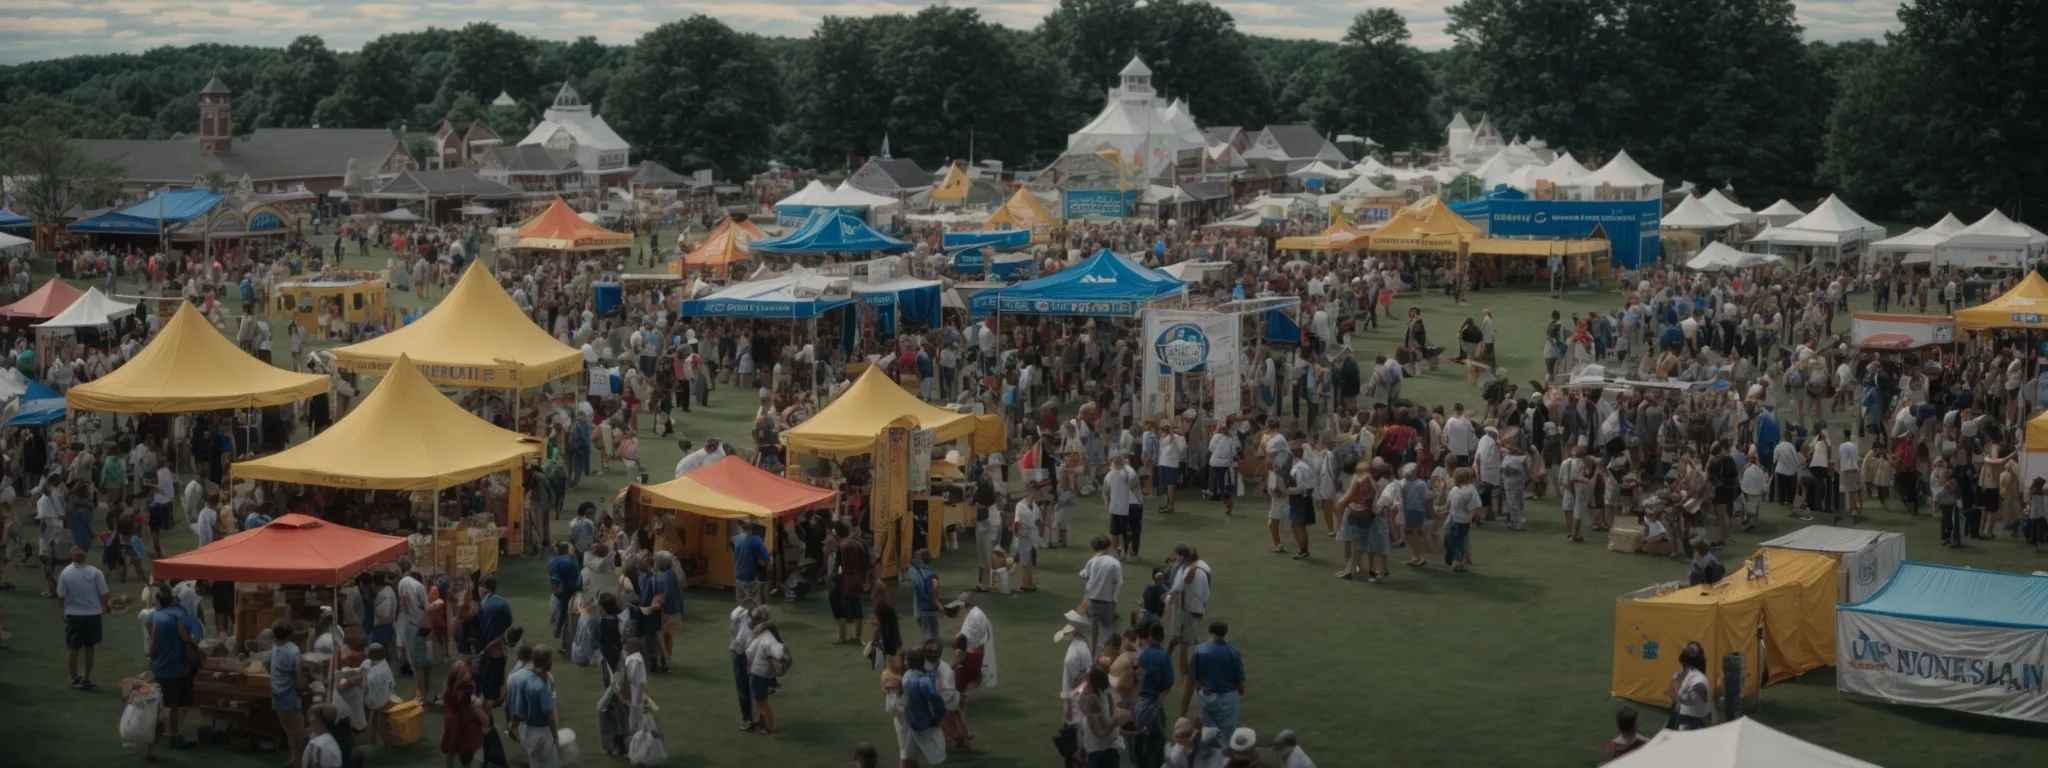 a bustling local festival in connecticut with businesses showcasing their products.